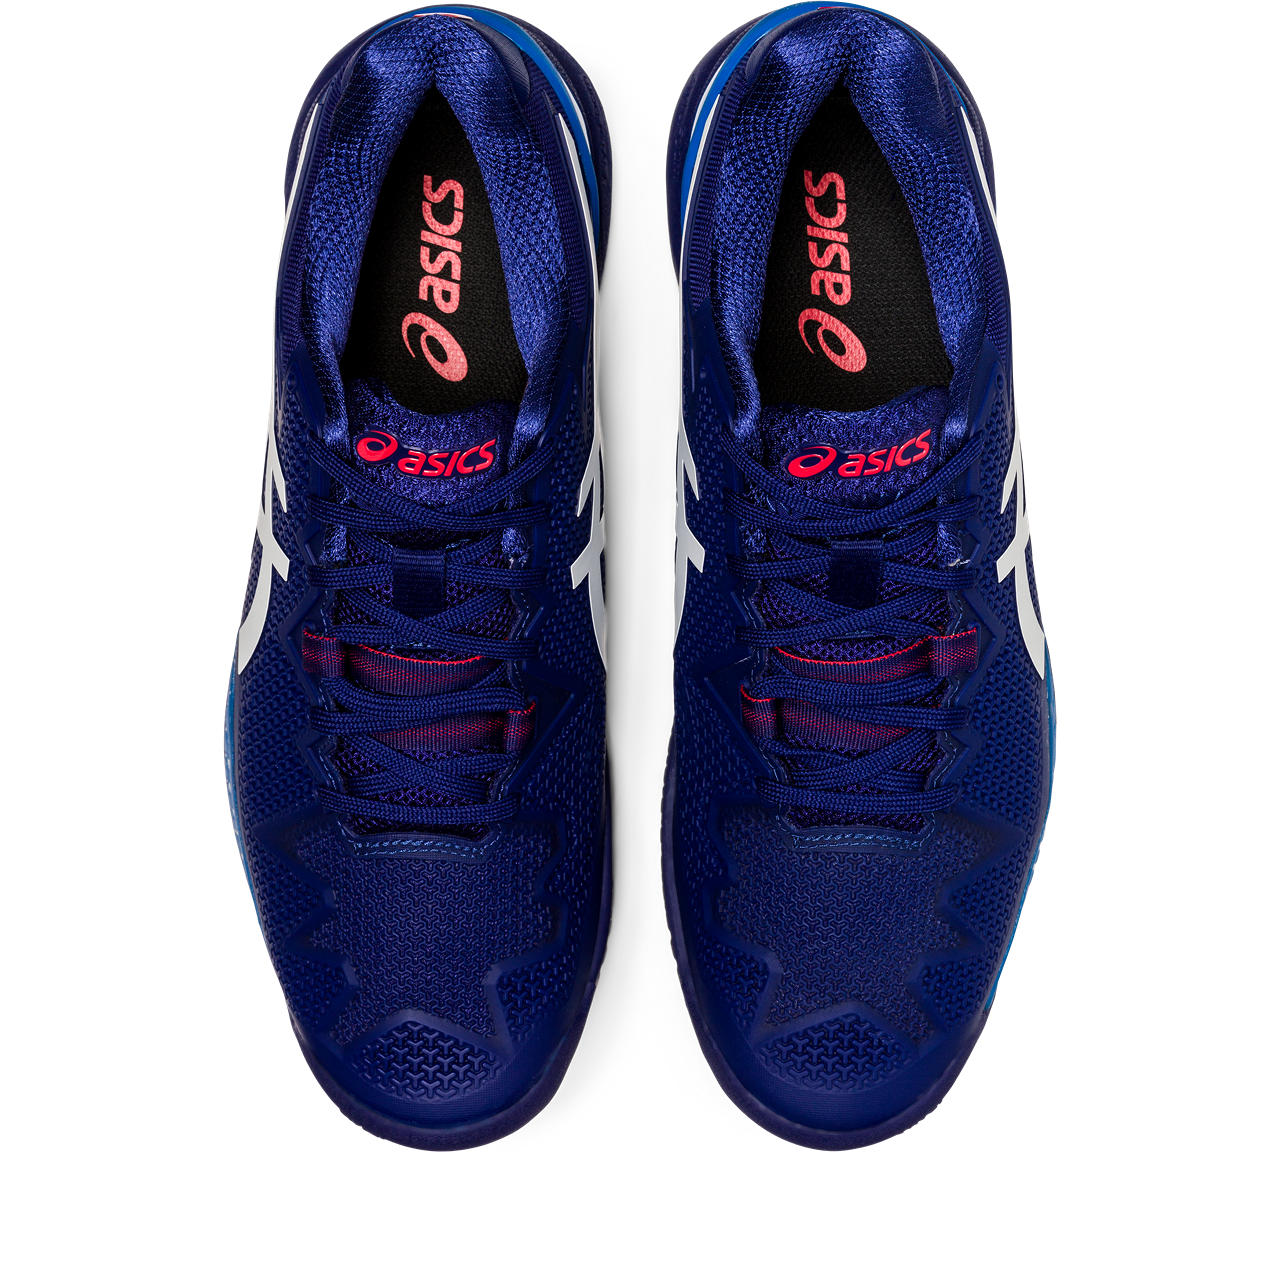 Top view of the Men's ASIC Gel Resolution 8 tennis shoe in the color Blue